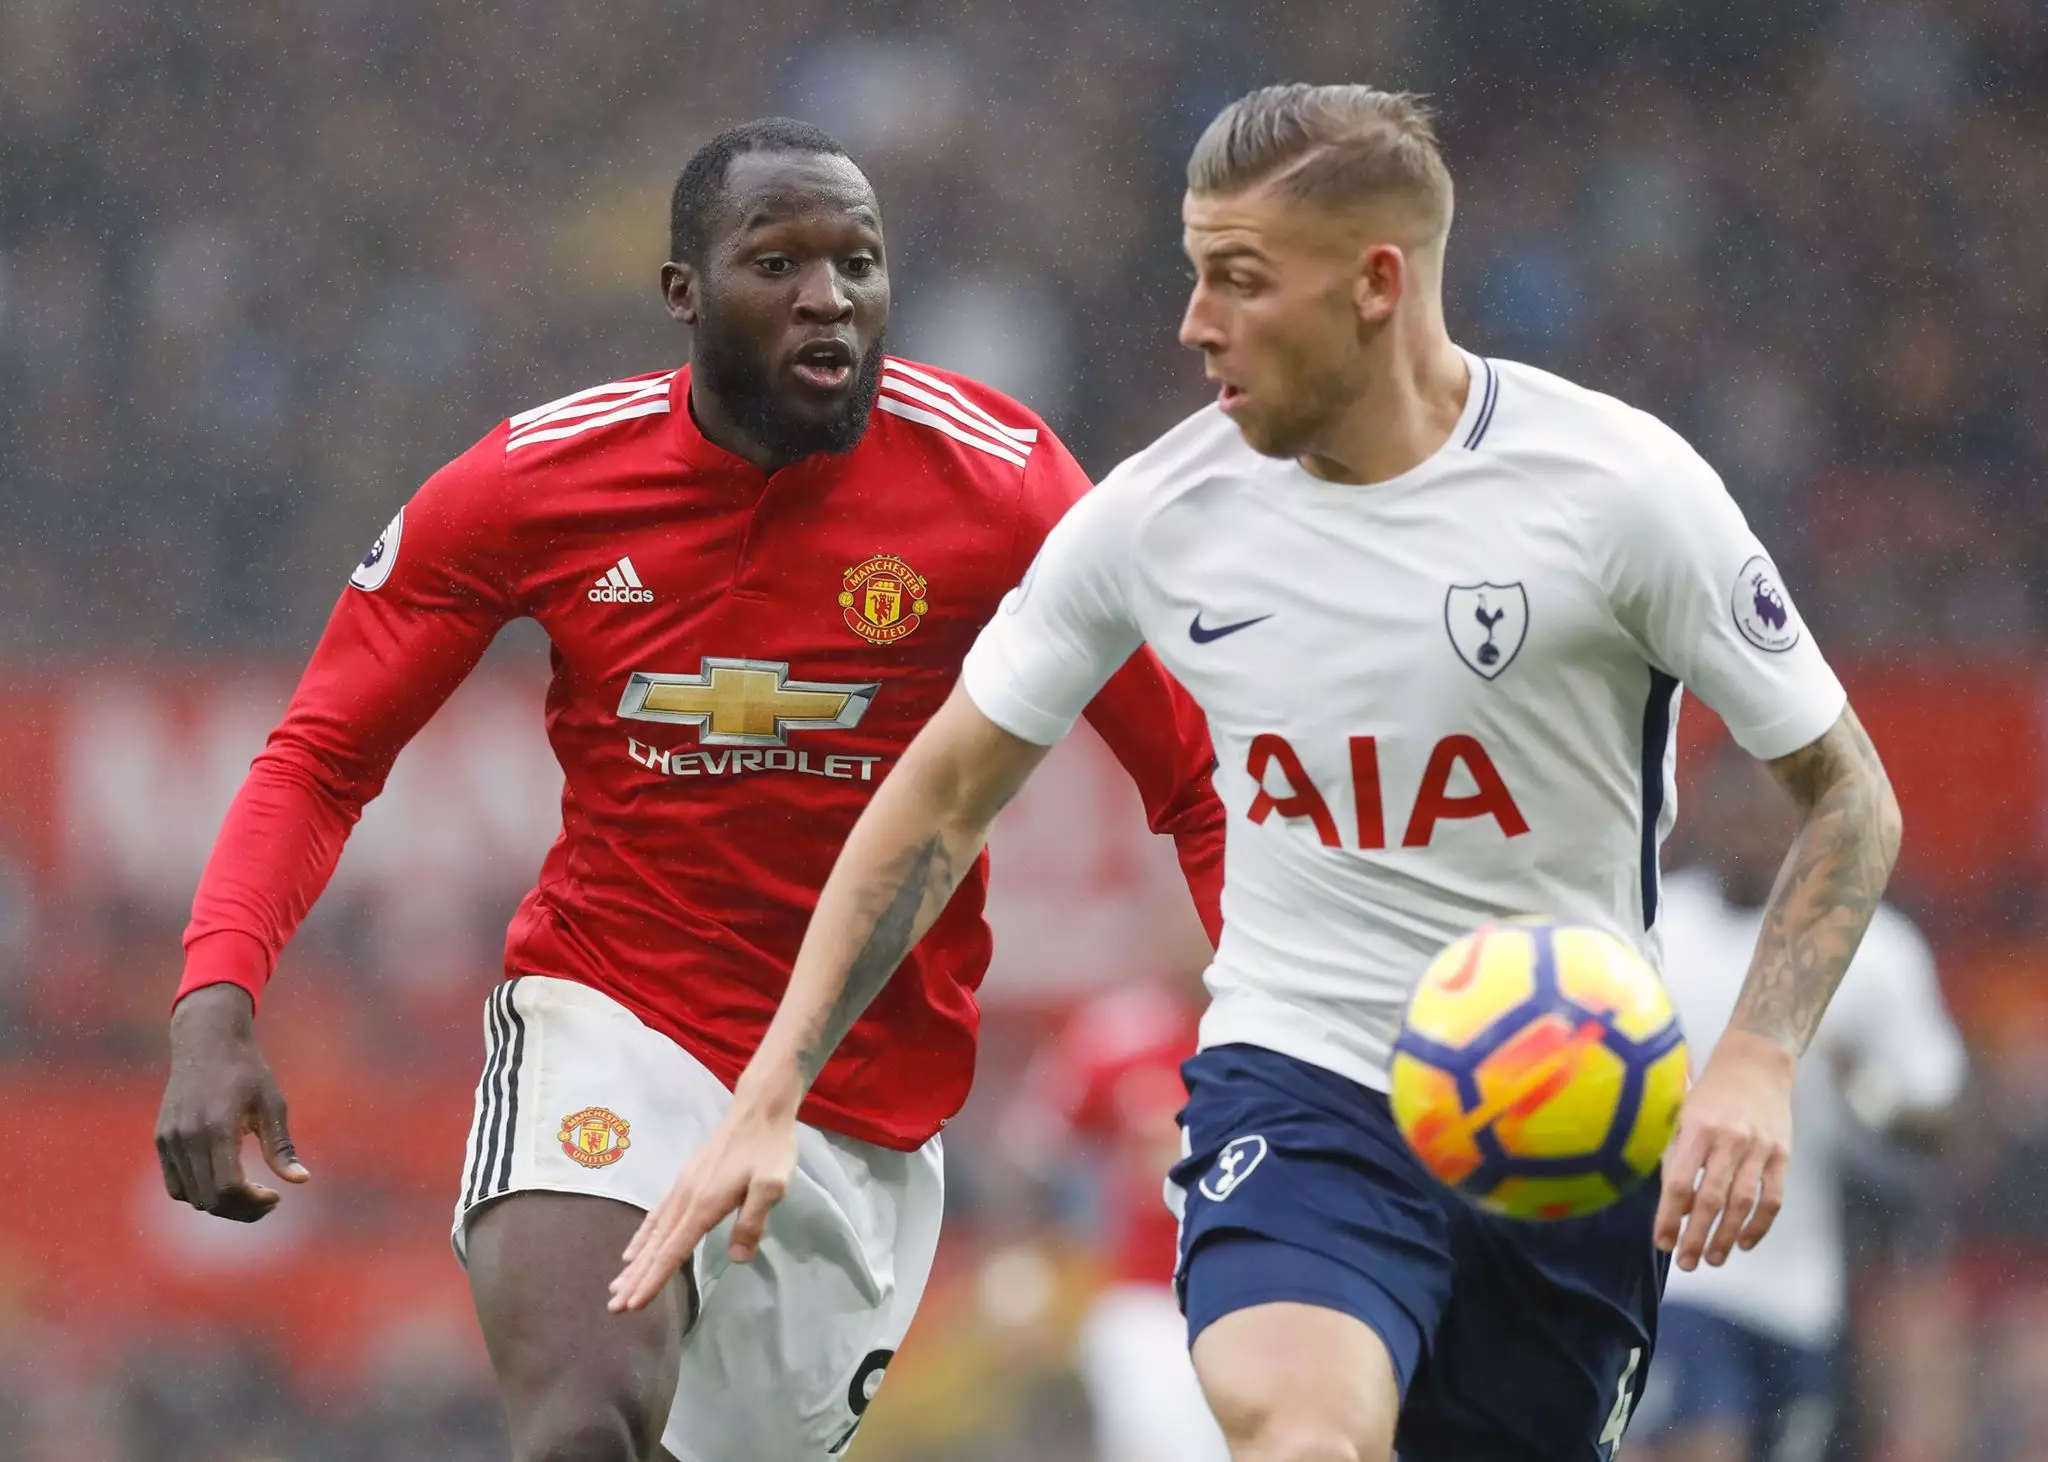 Alderweireld has long been linked with a move to United. Image: PA